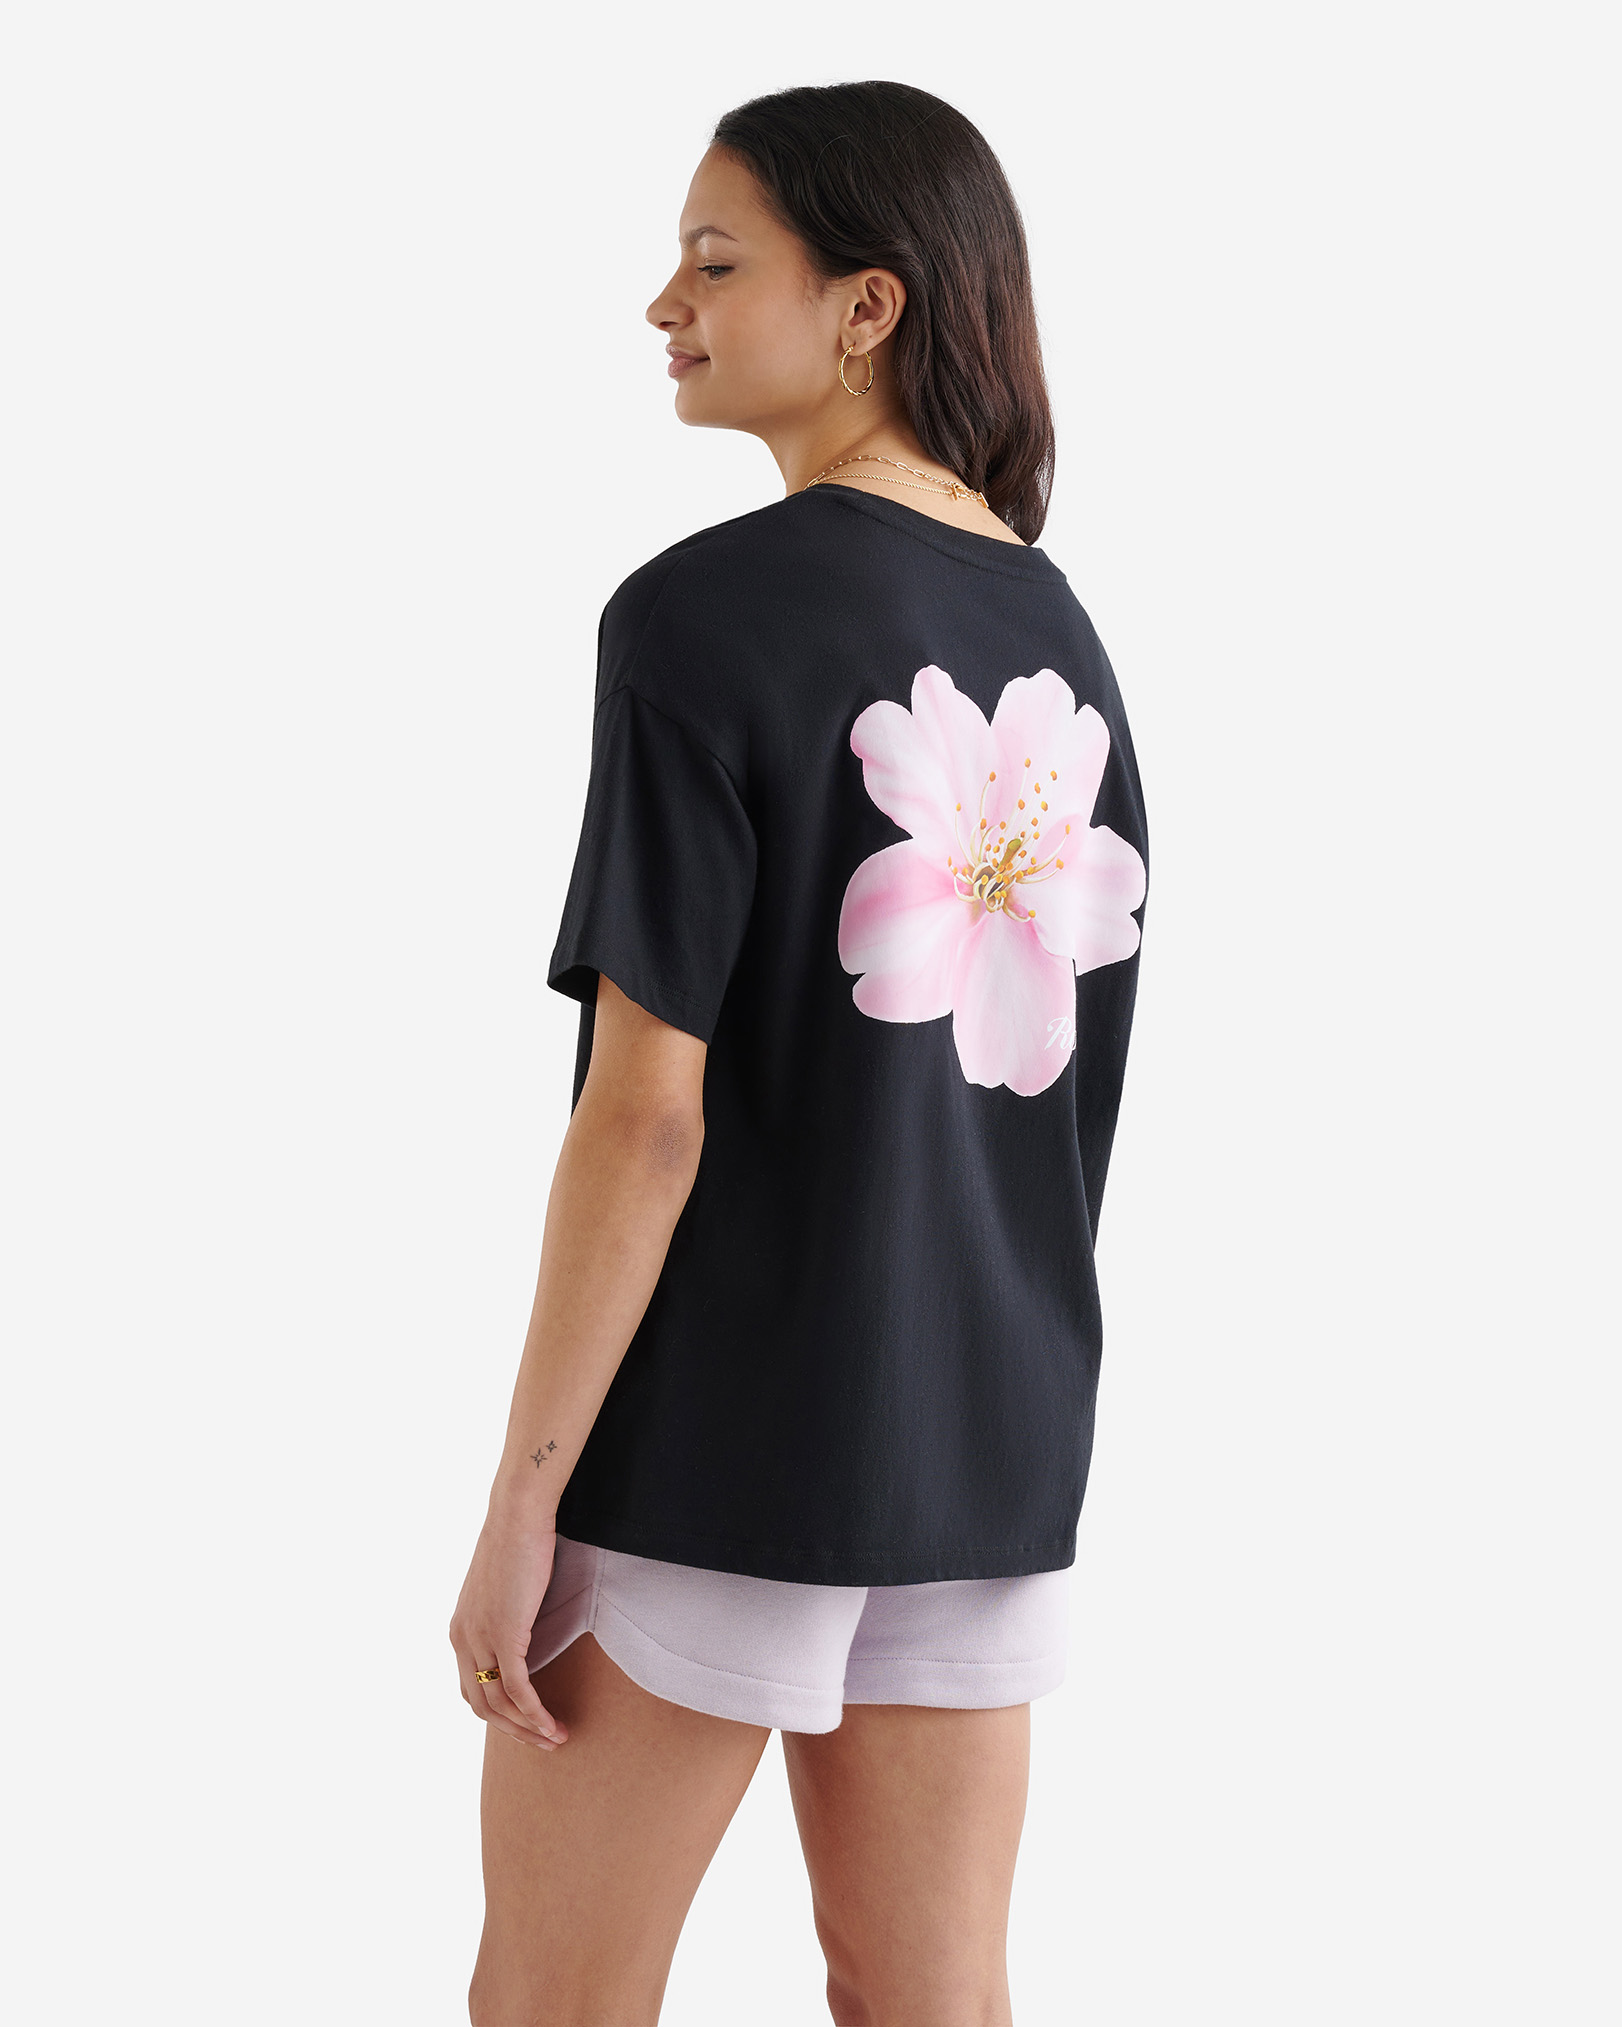 Roots Women's Floral Relaxed T-Shirt in Black